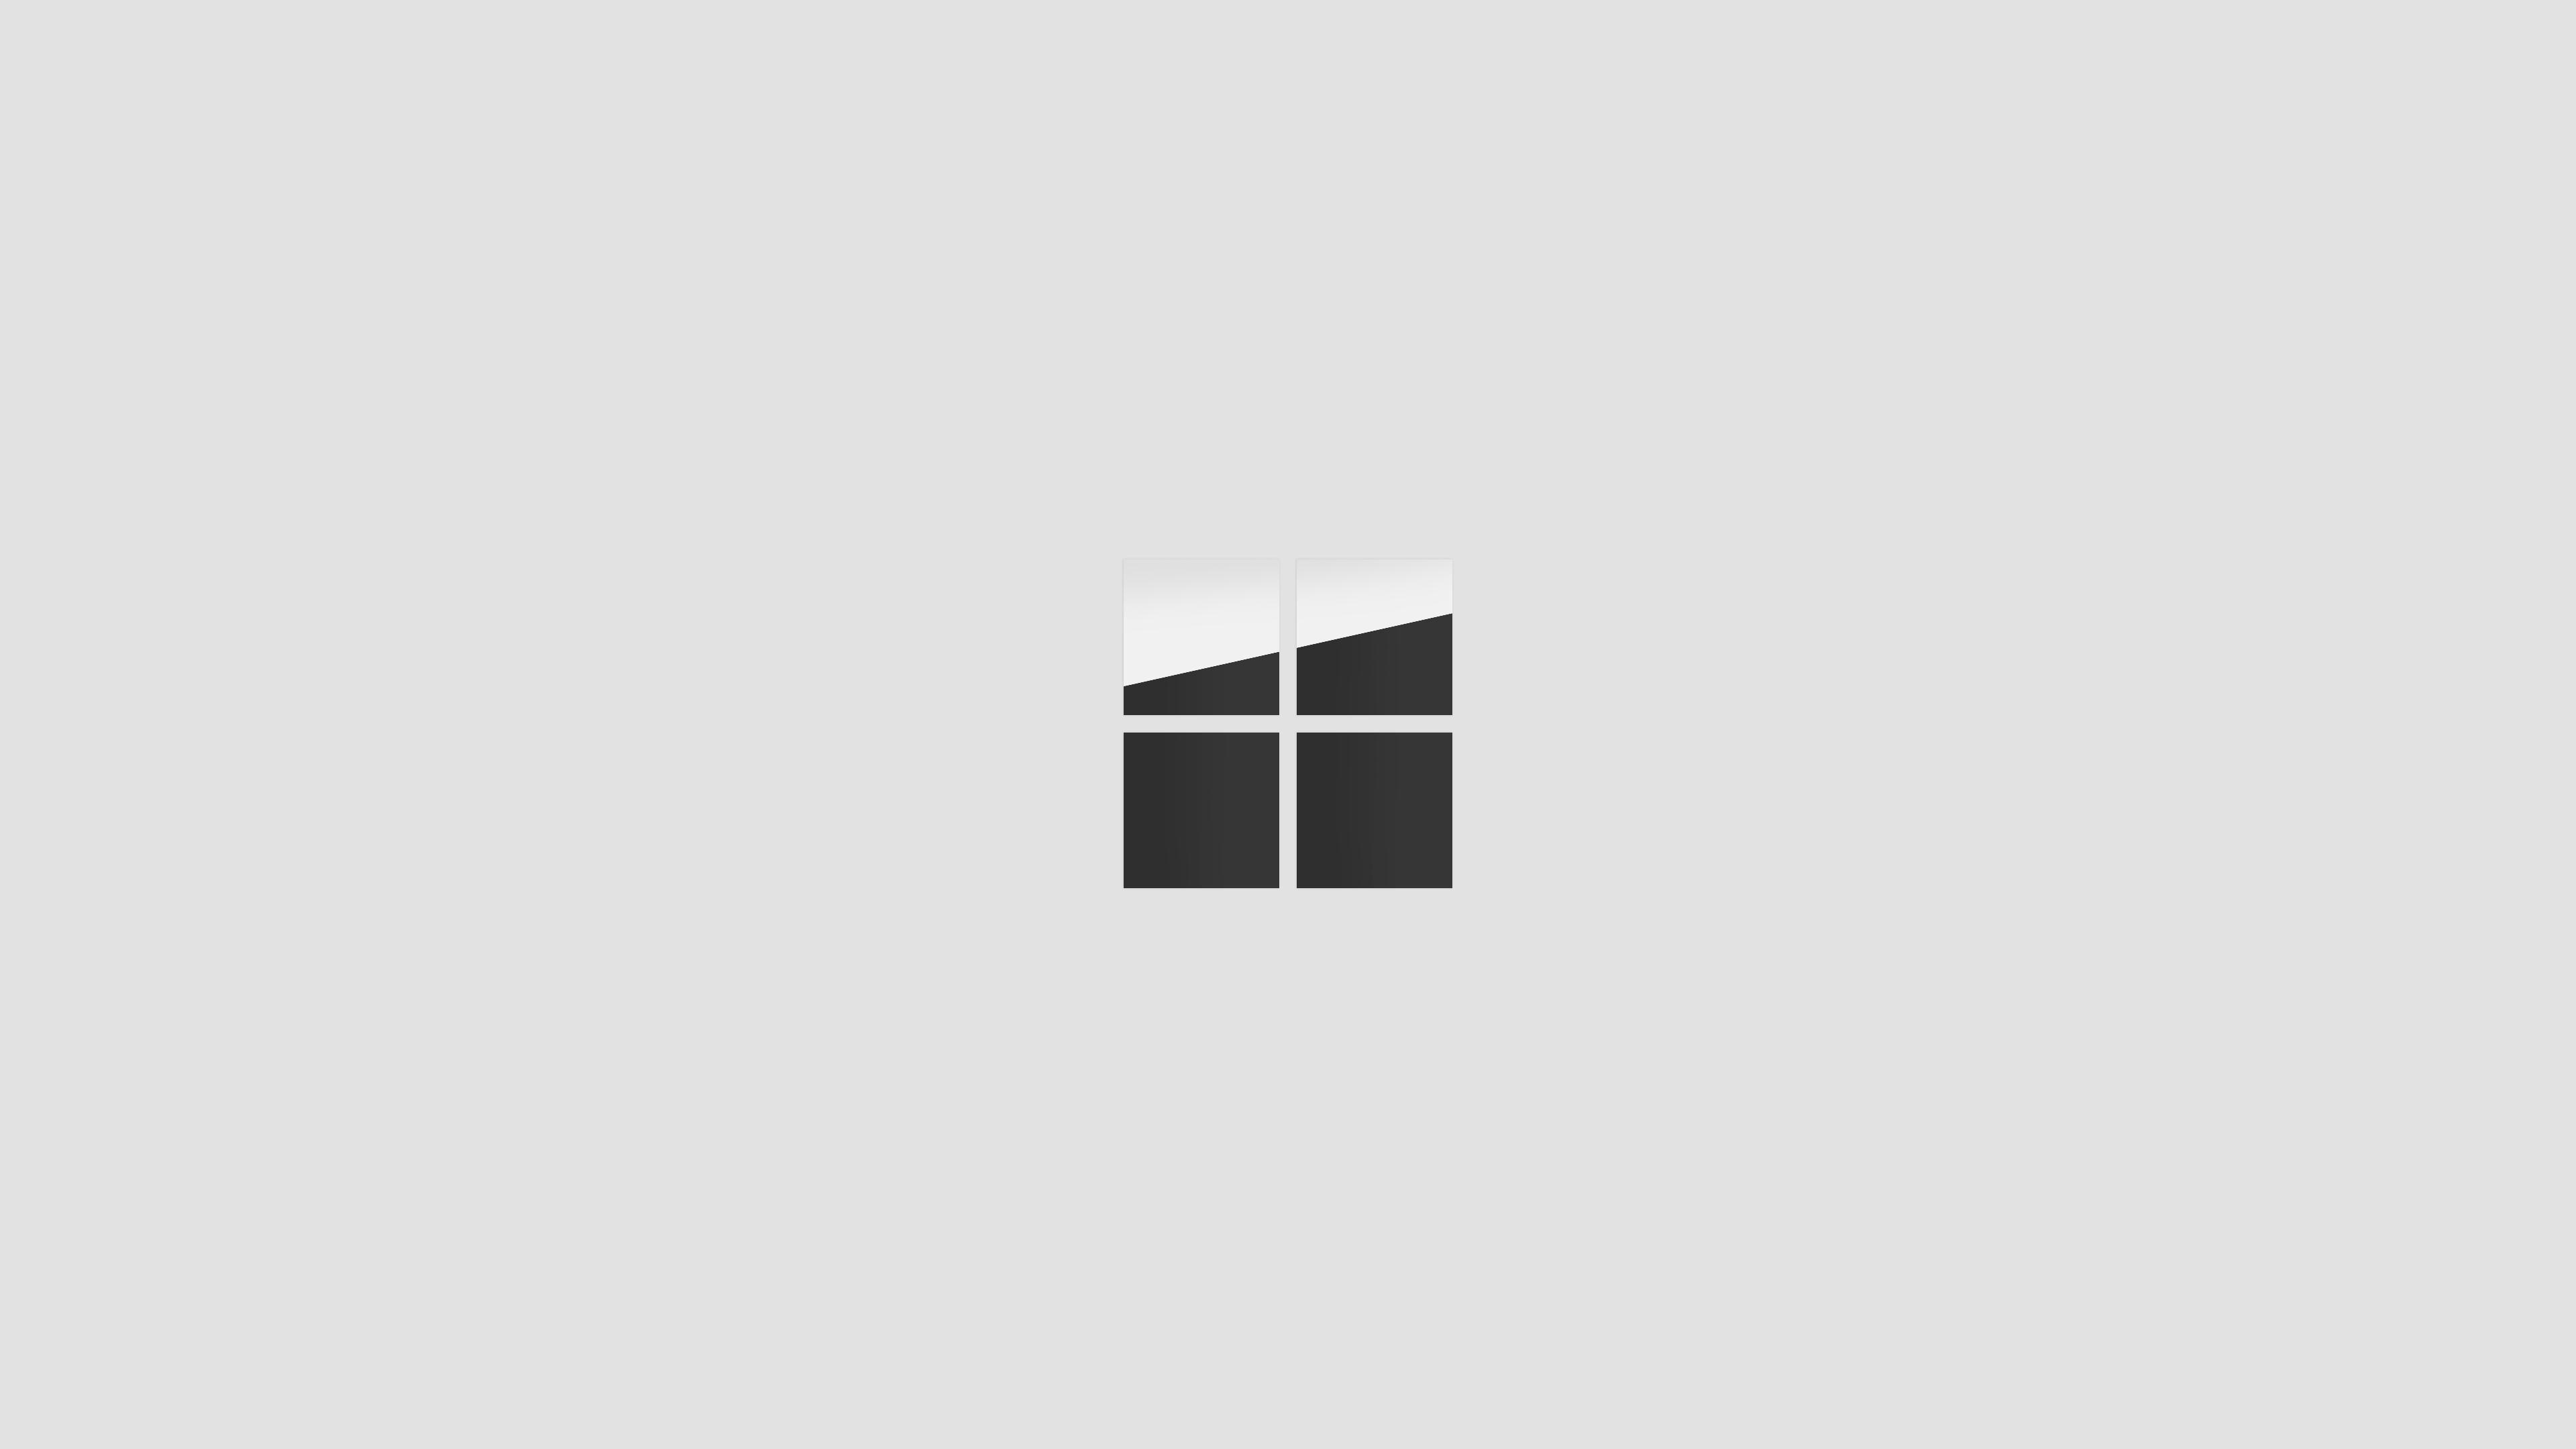 Microsoft Surface Logo - Have made a 4K adapted version of Microsoft Surface logo which is ...